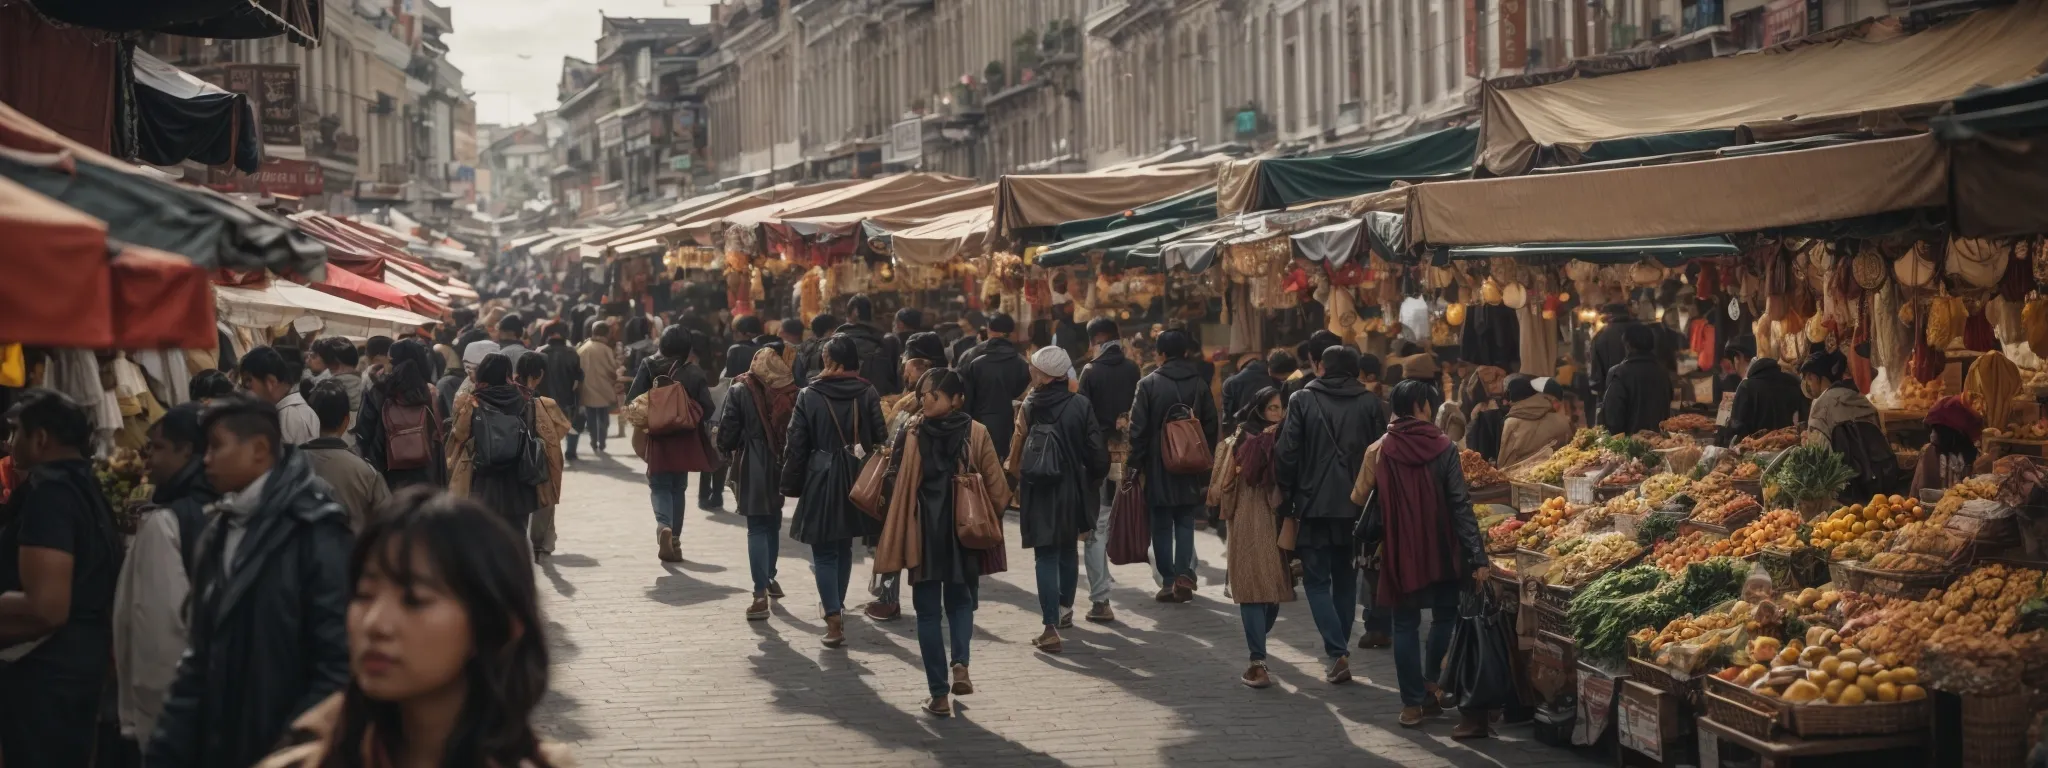 a busy local market street bustling with diverse shoppers using smartphones.